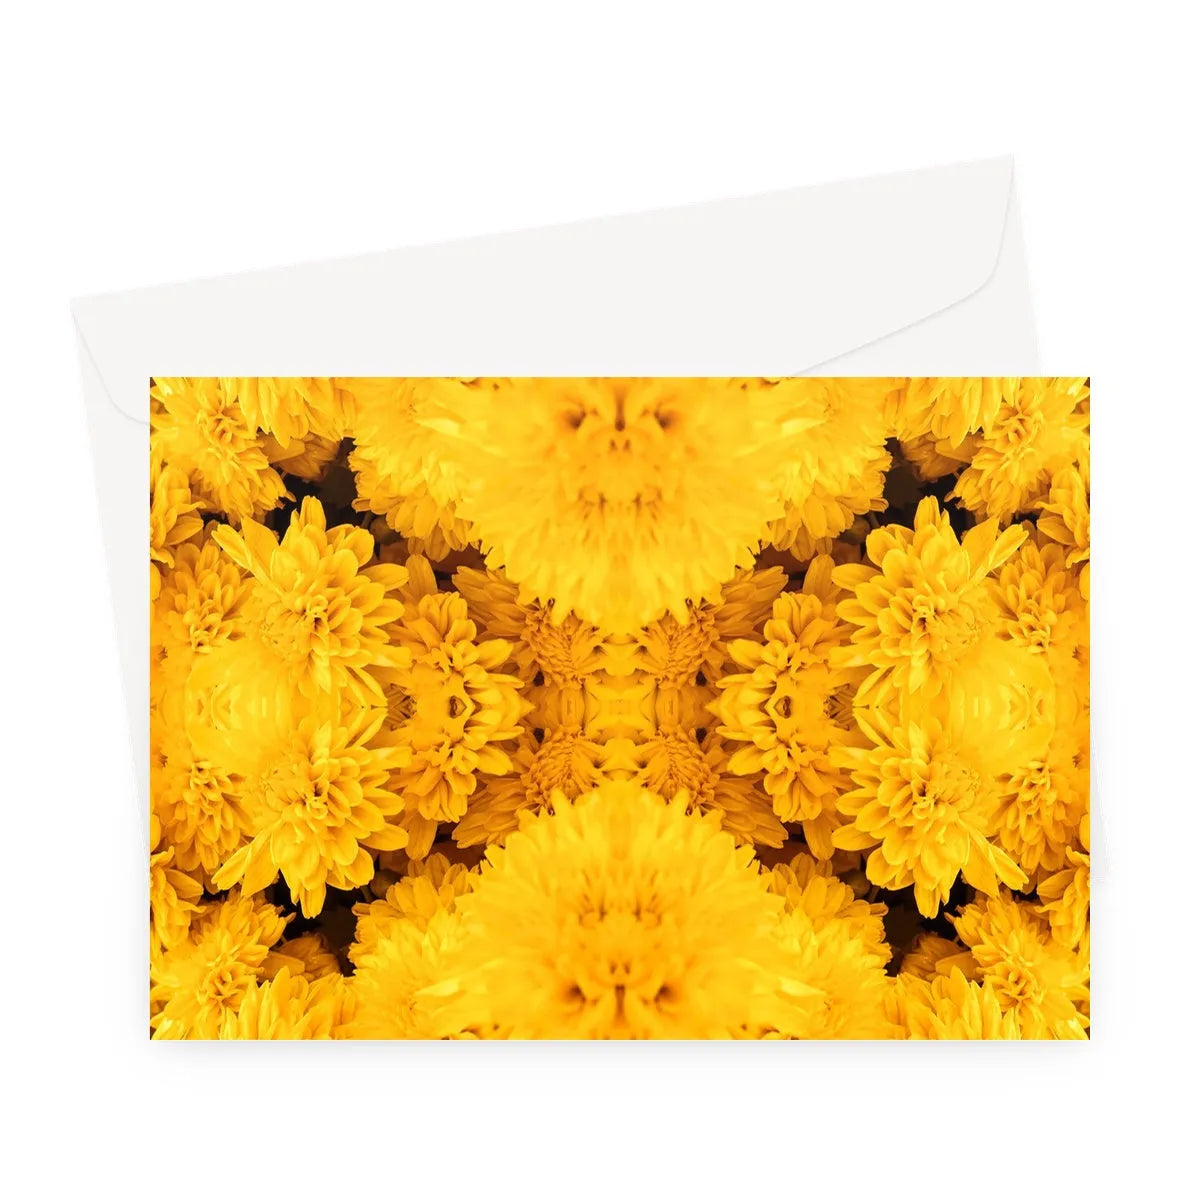 Gold Rush Greeting Card - A5 Landscape / 1 Card - Greeting & Note Cards - Aesthetic Art